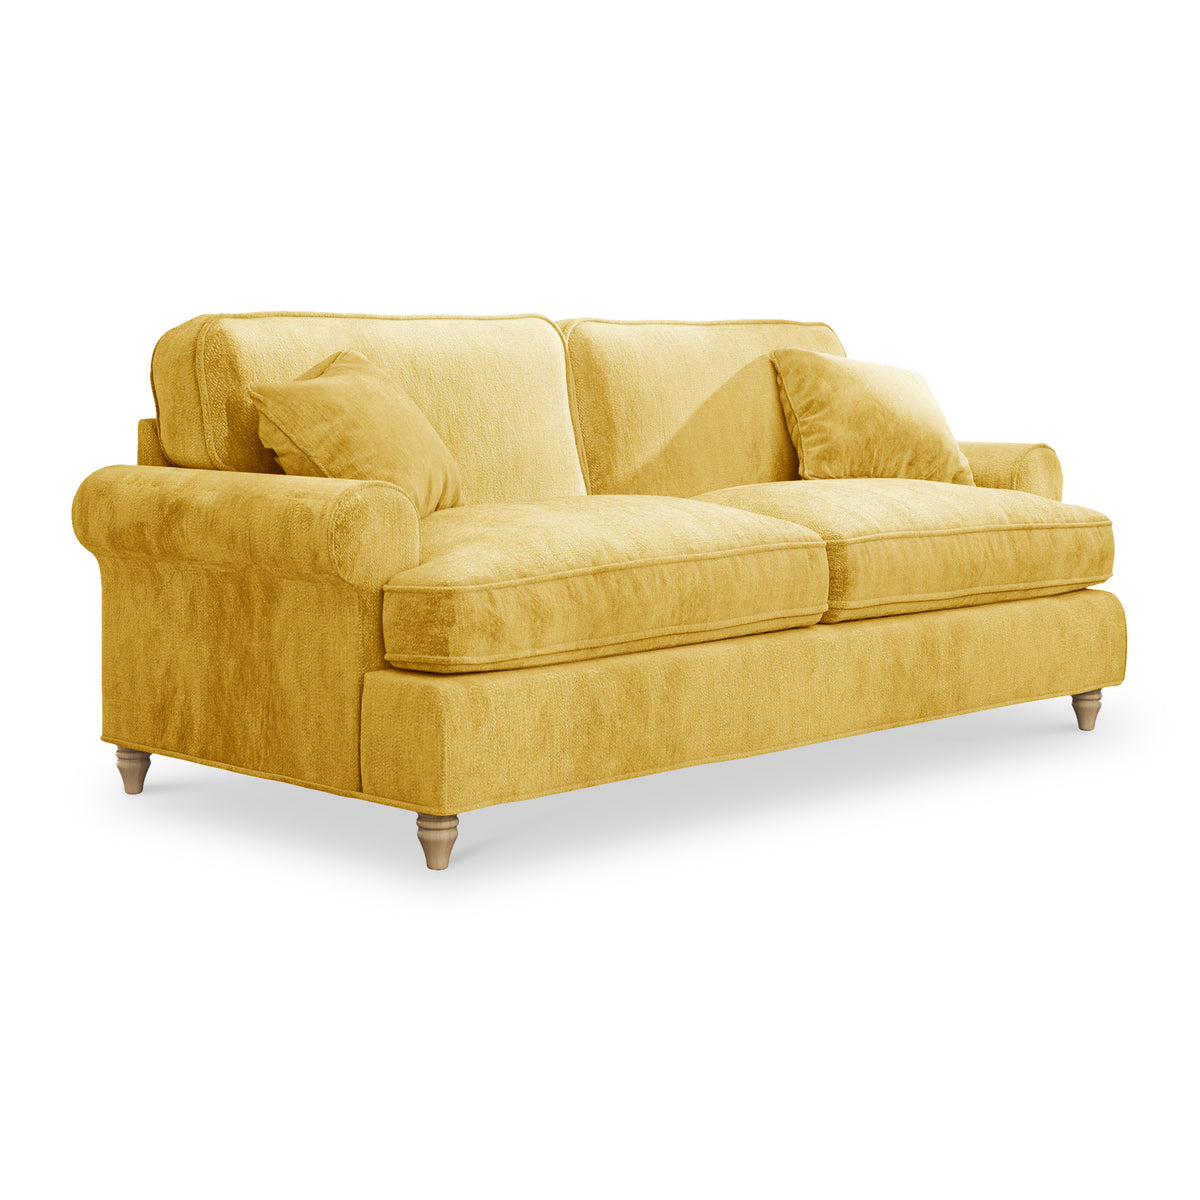 Alfie Gold 3 Seater Sofa from Roseland Furniture